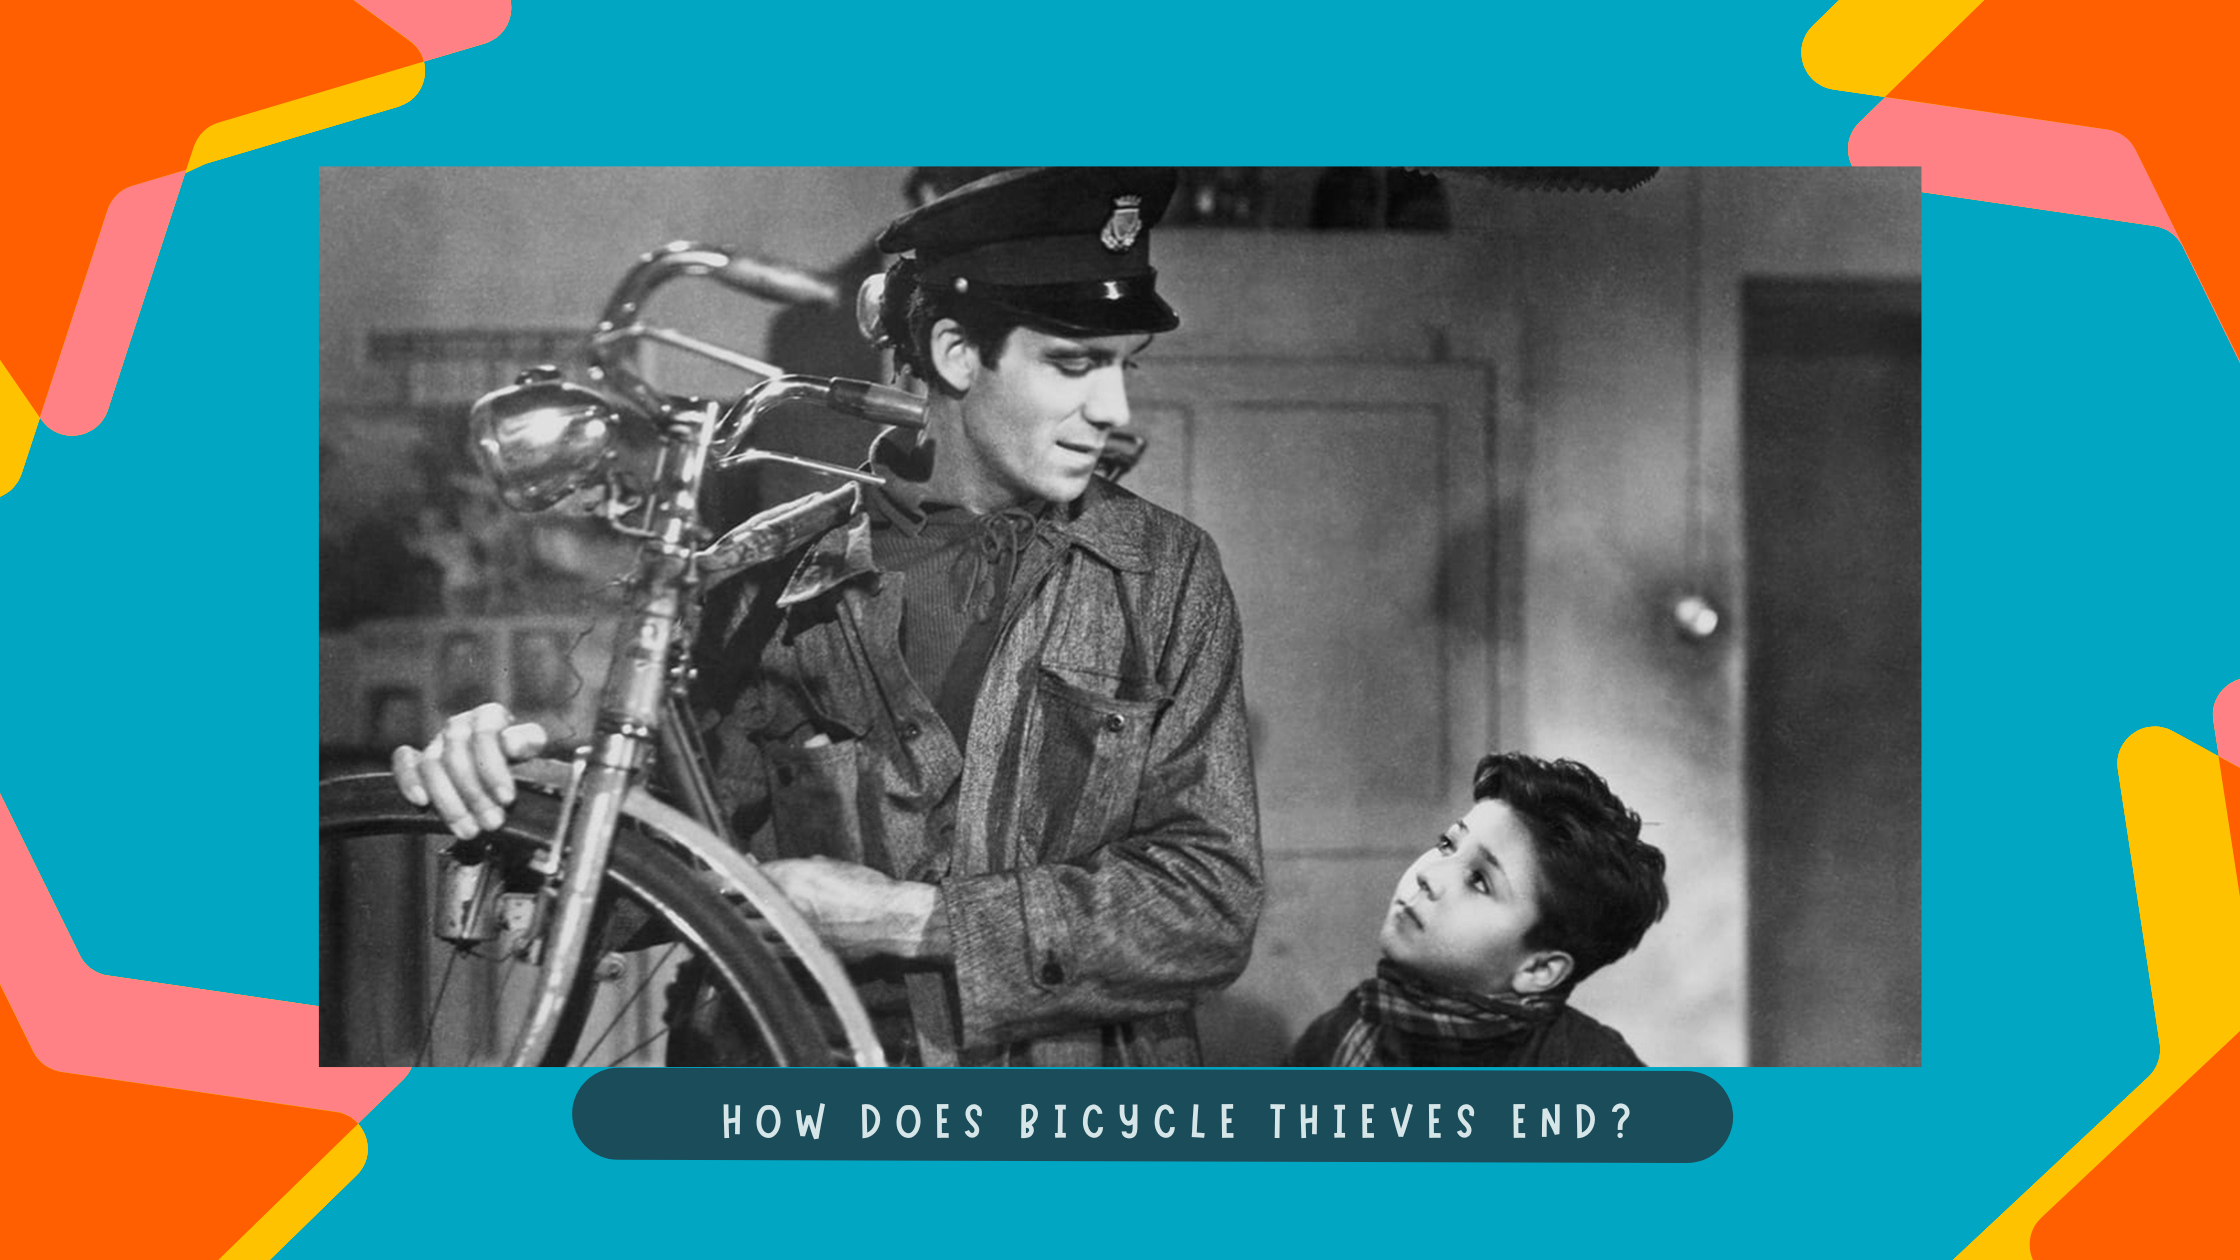 How Does Bicycle Thieves End?